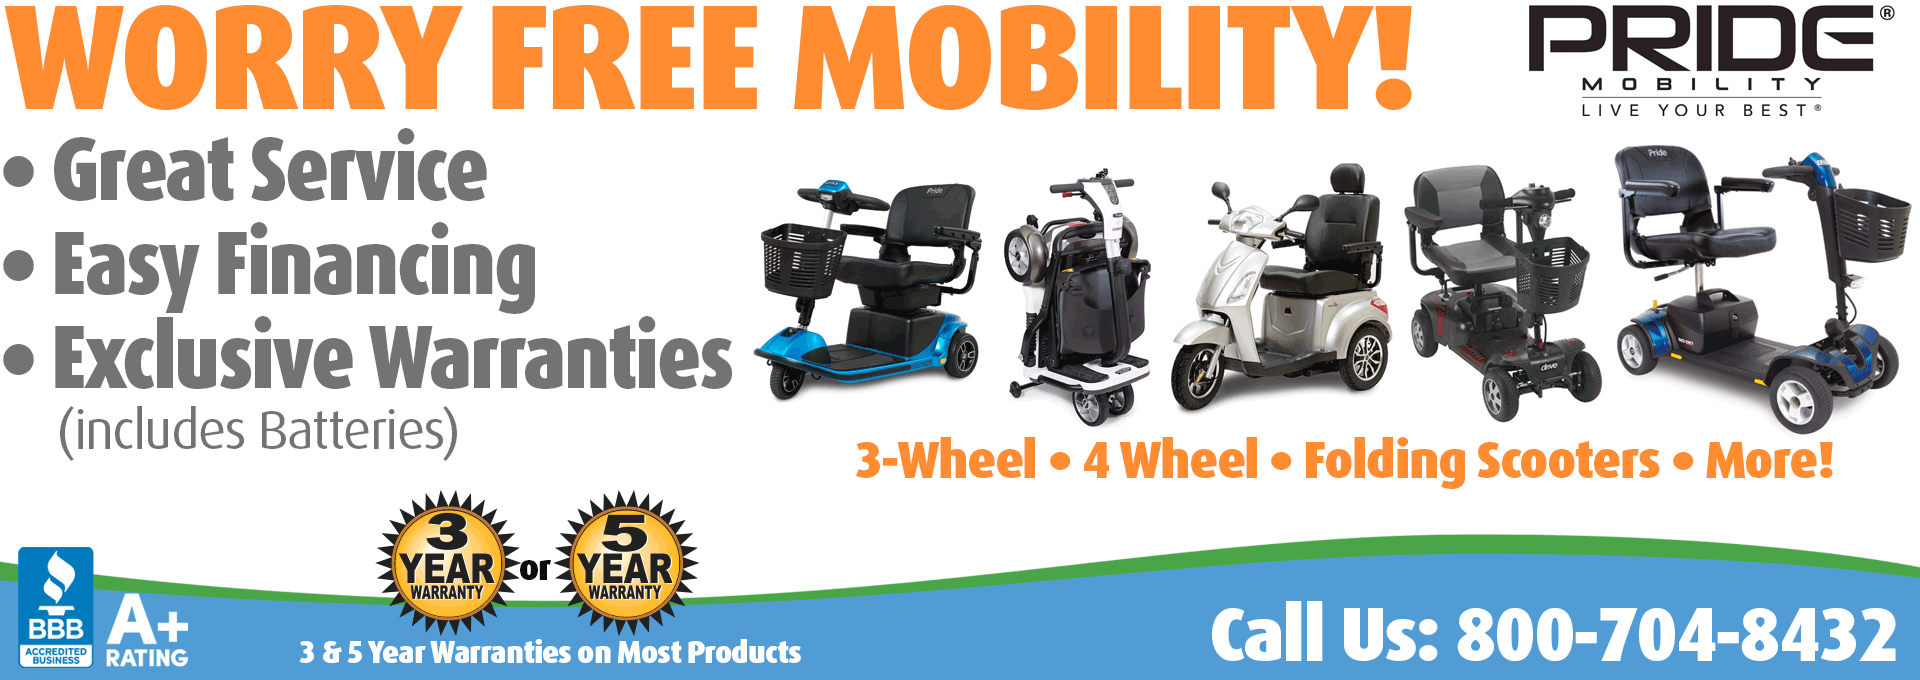 Living Well Stores: The Best from Pride Mobility featuring Power Mobility Scooters, Folding Mobility Scooters, Parts, Services, Accessories